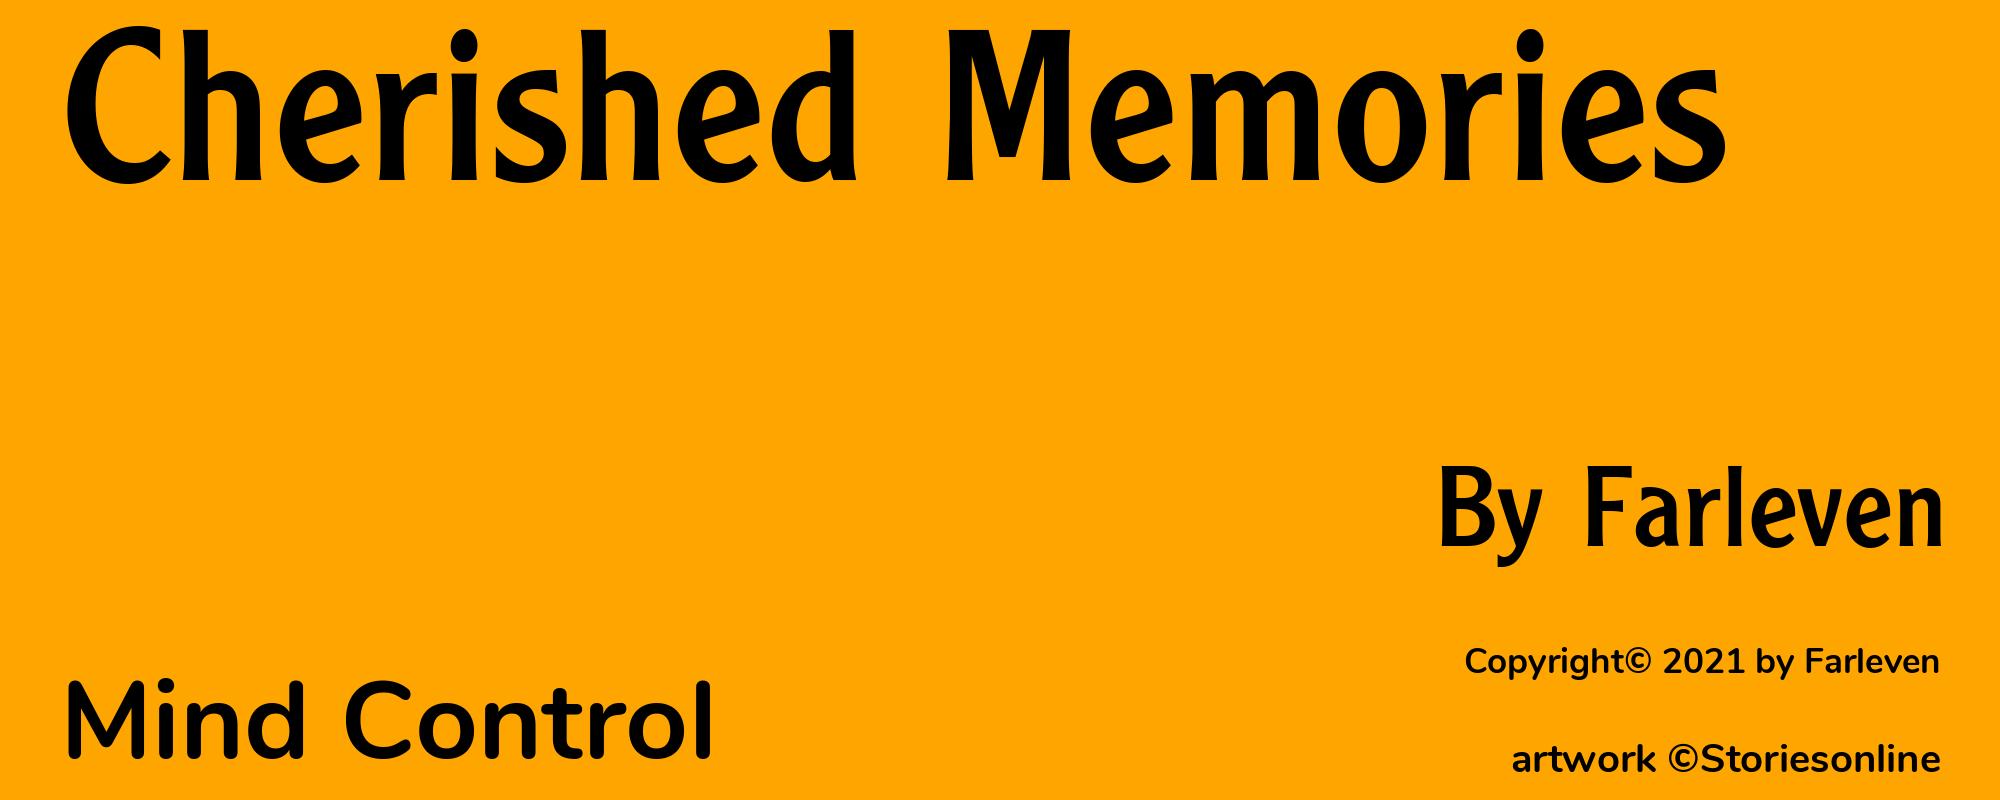 Cherished Memories - Cover